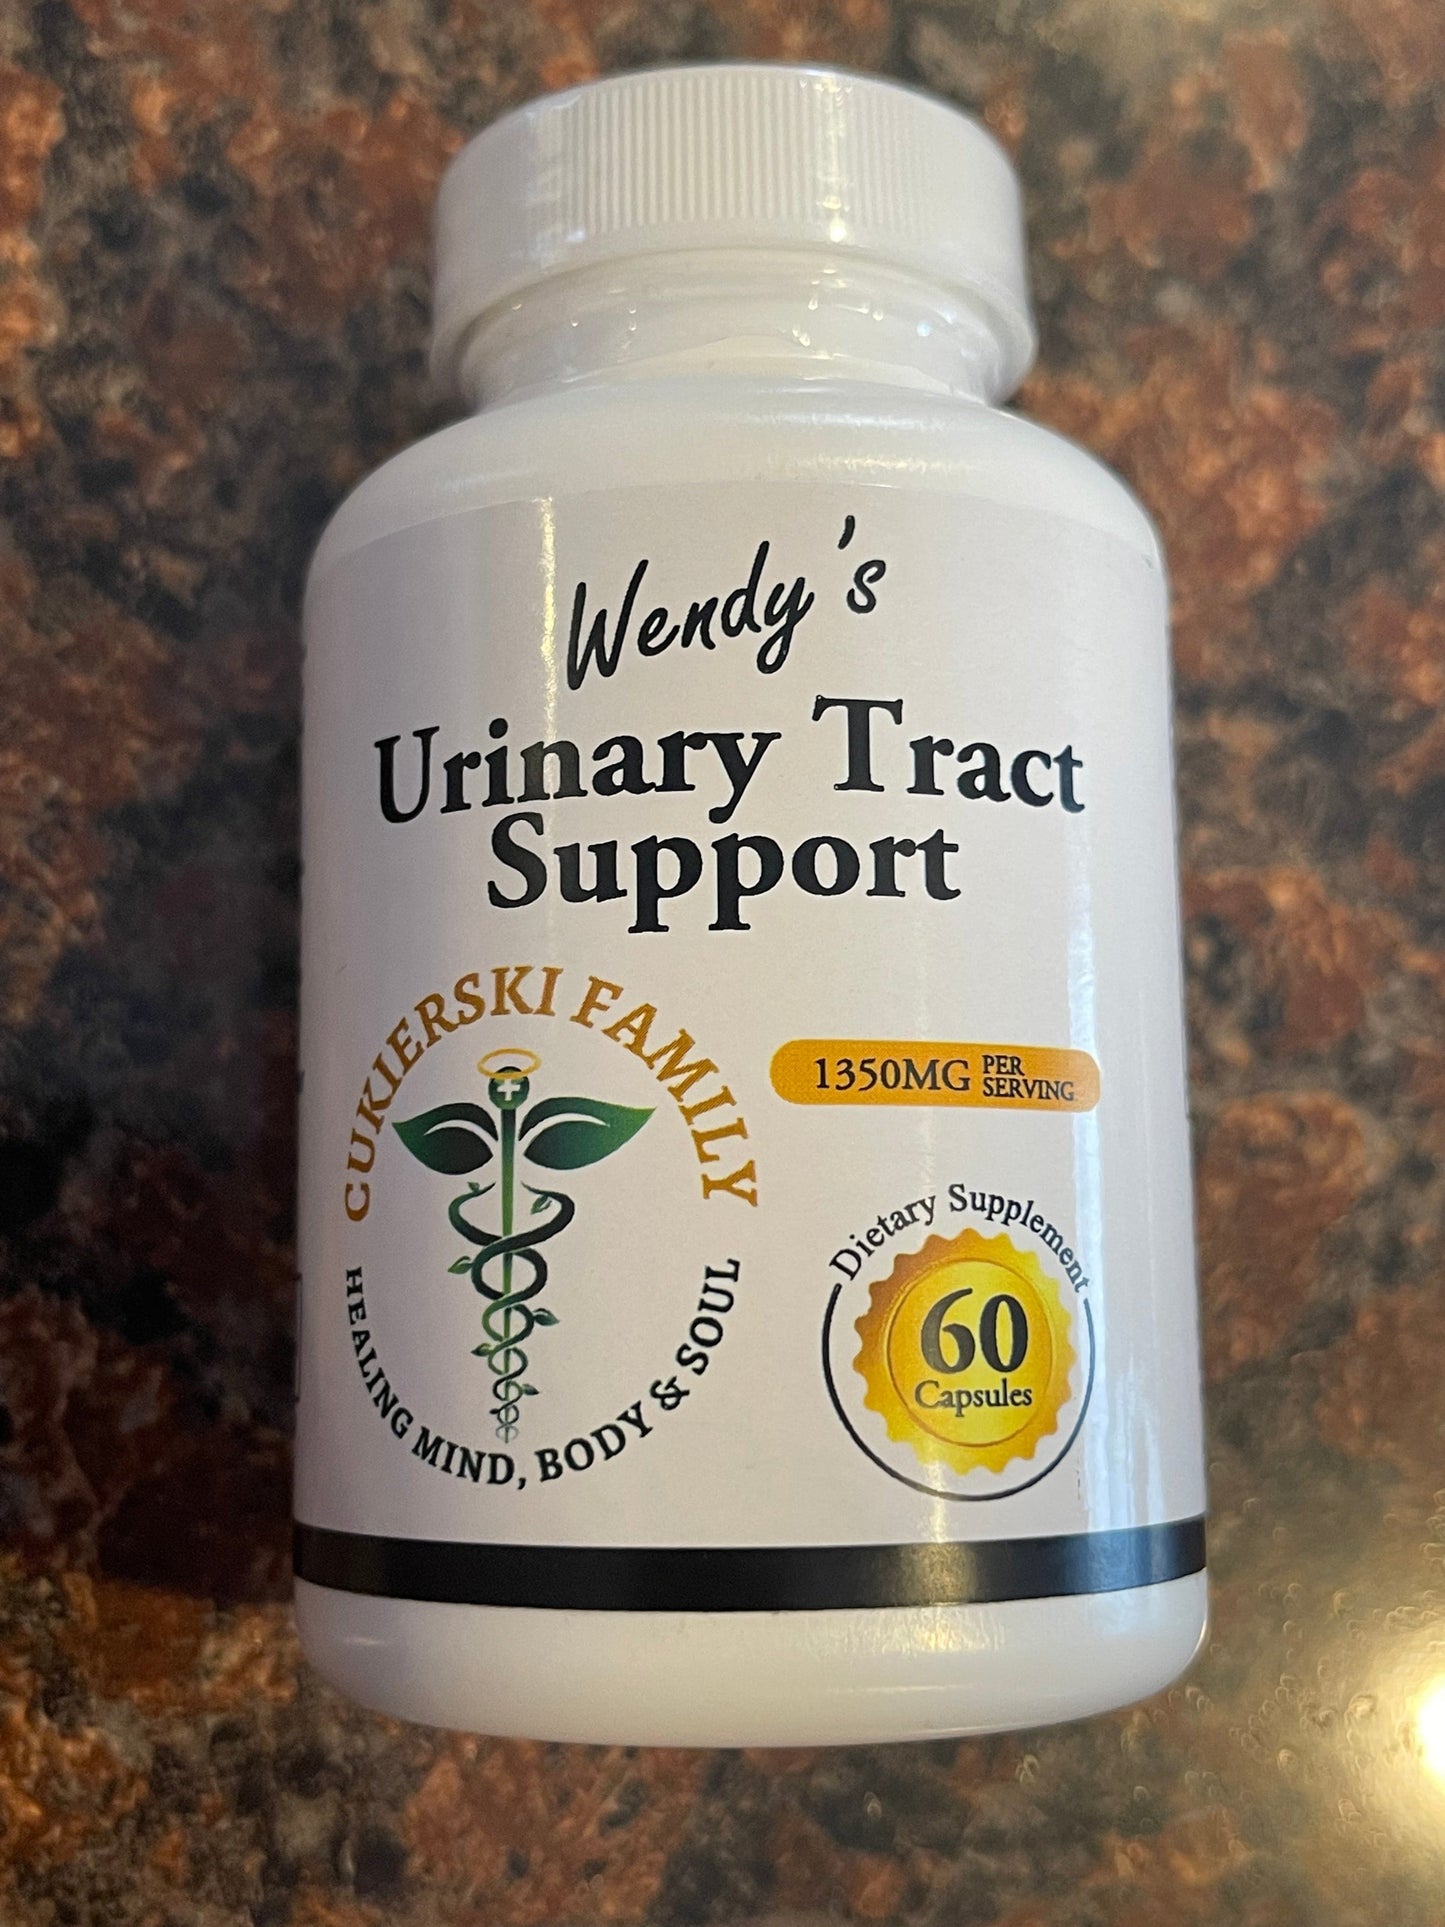 Wendy's Urinary Tract Support